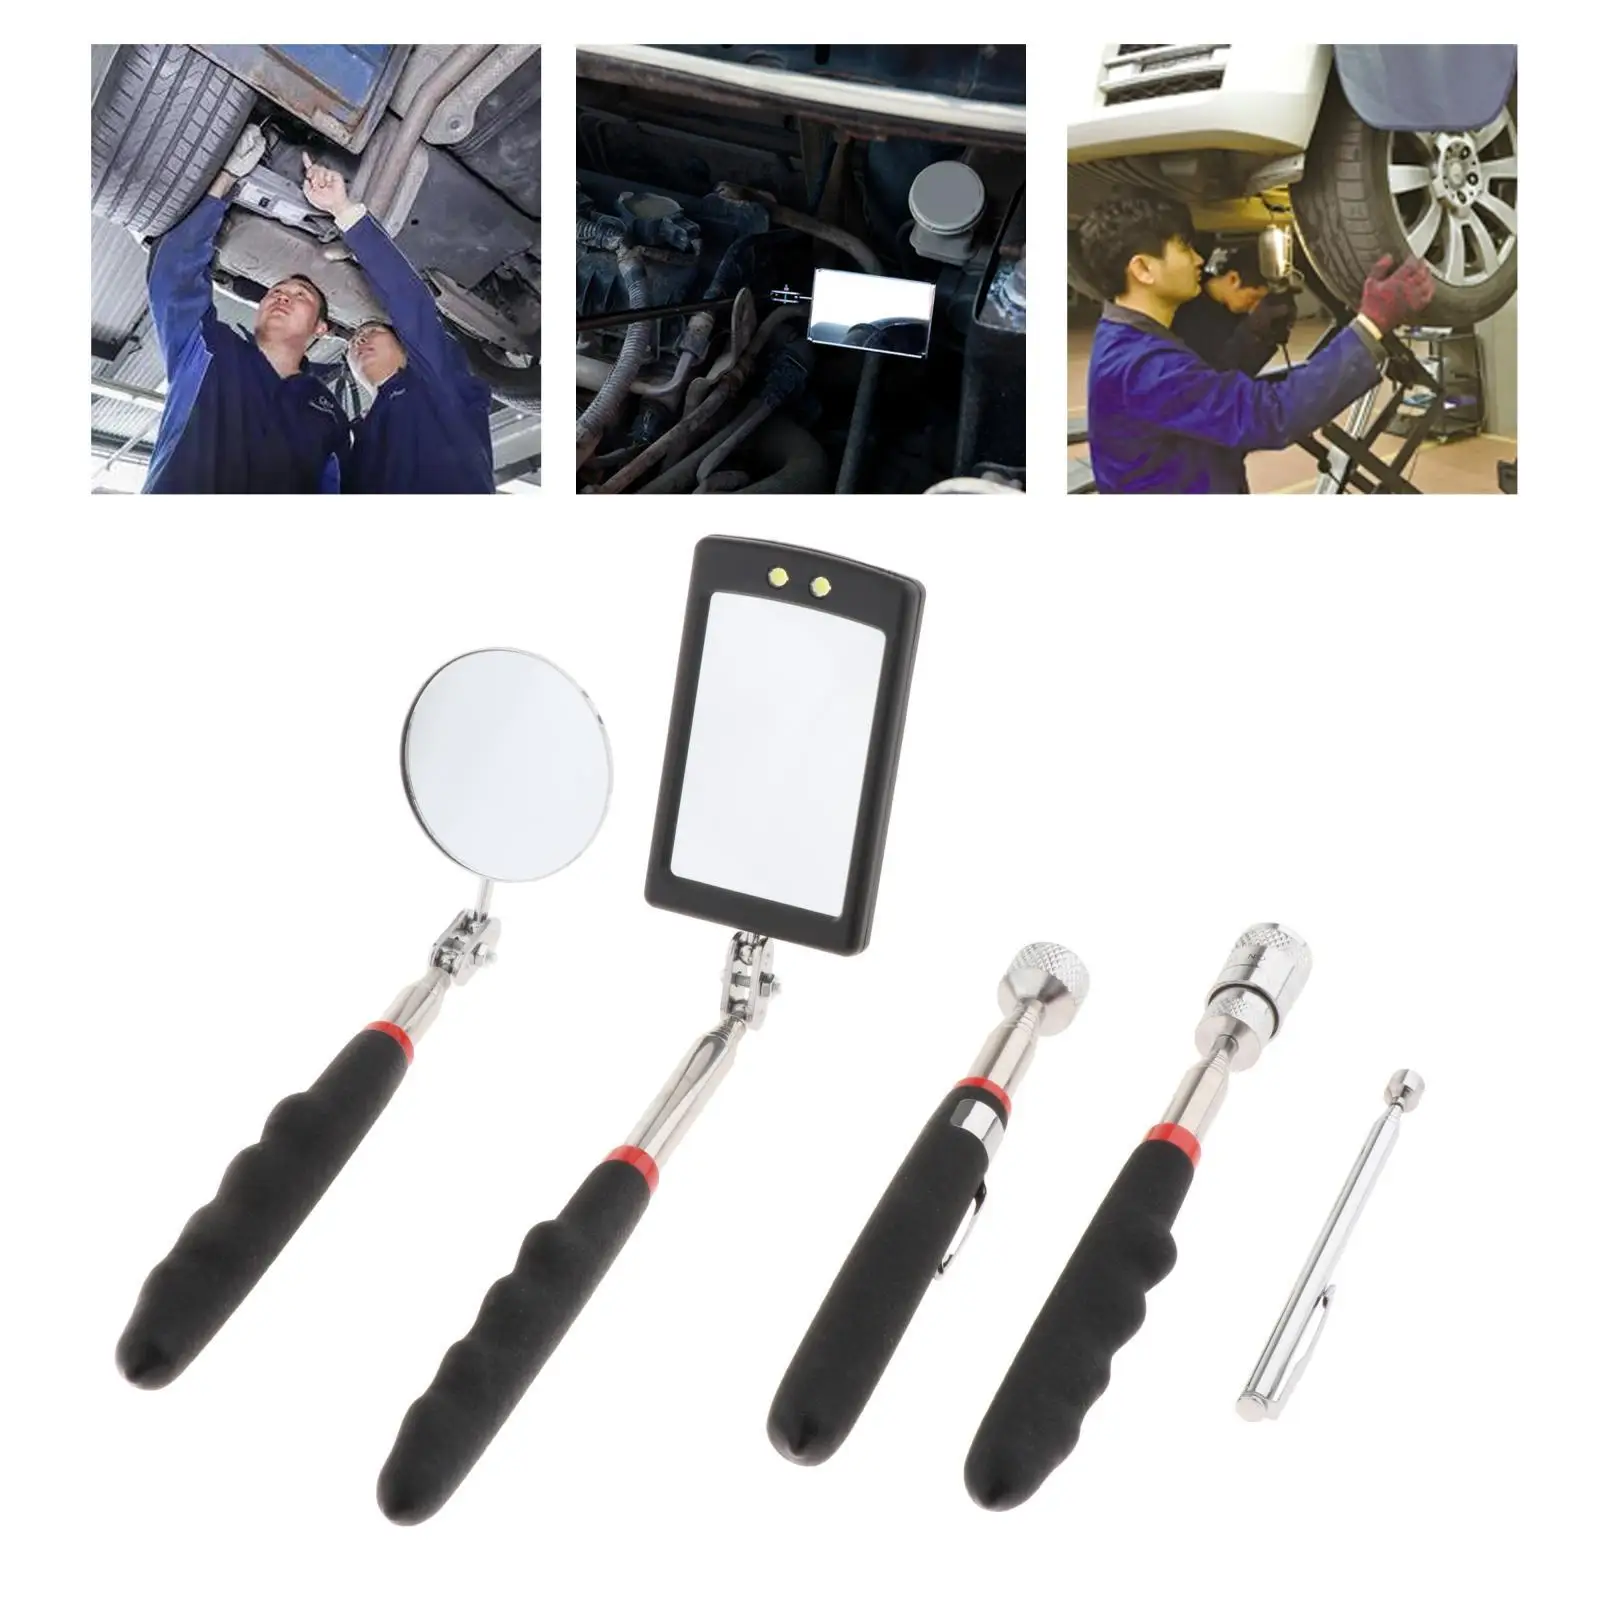 Magnetic Telescoping Pickup Tool Set with Magnetic Suction Rod Fits for Car Maintenance